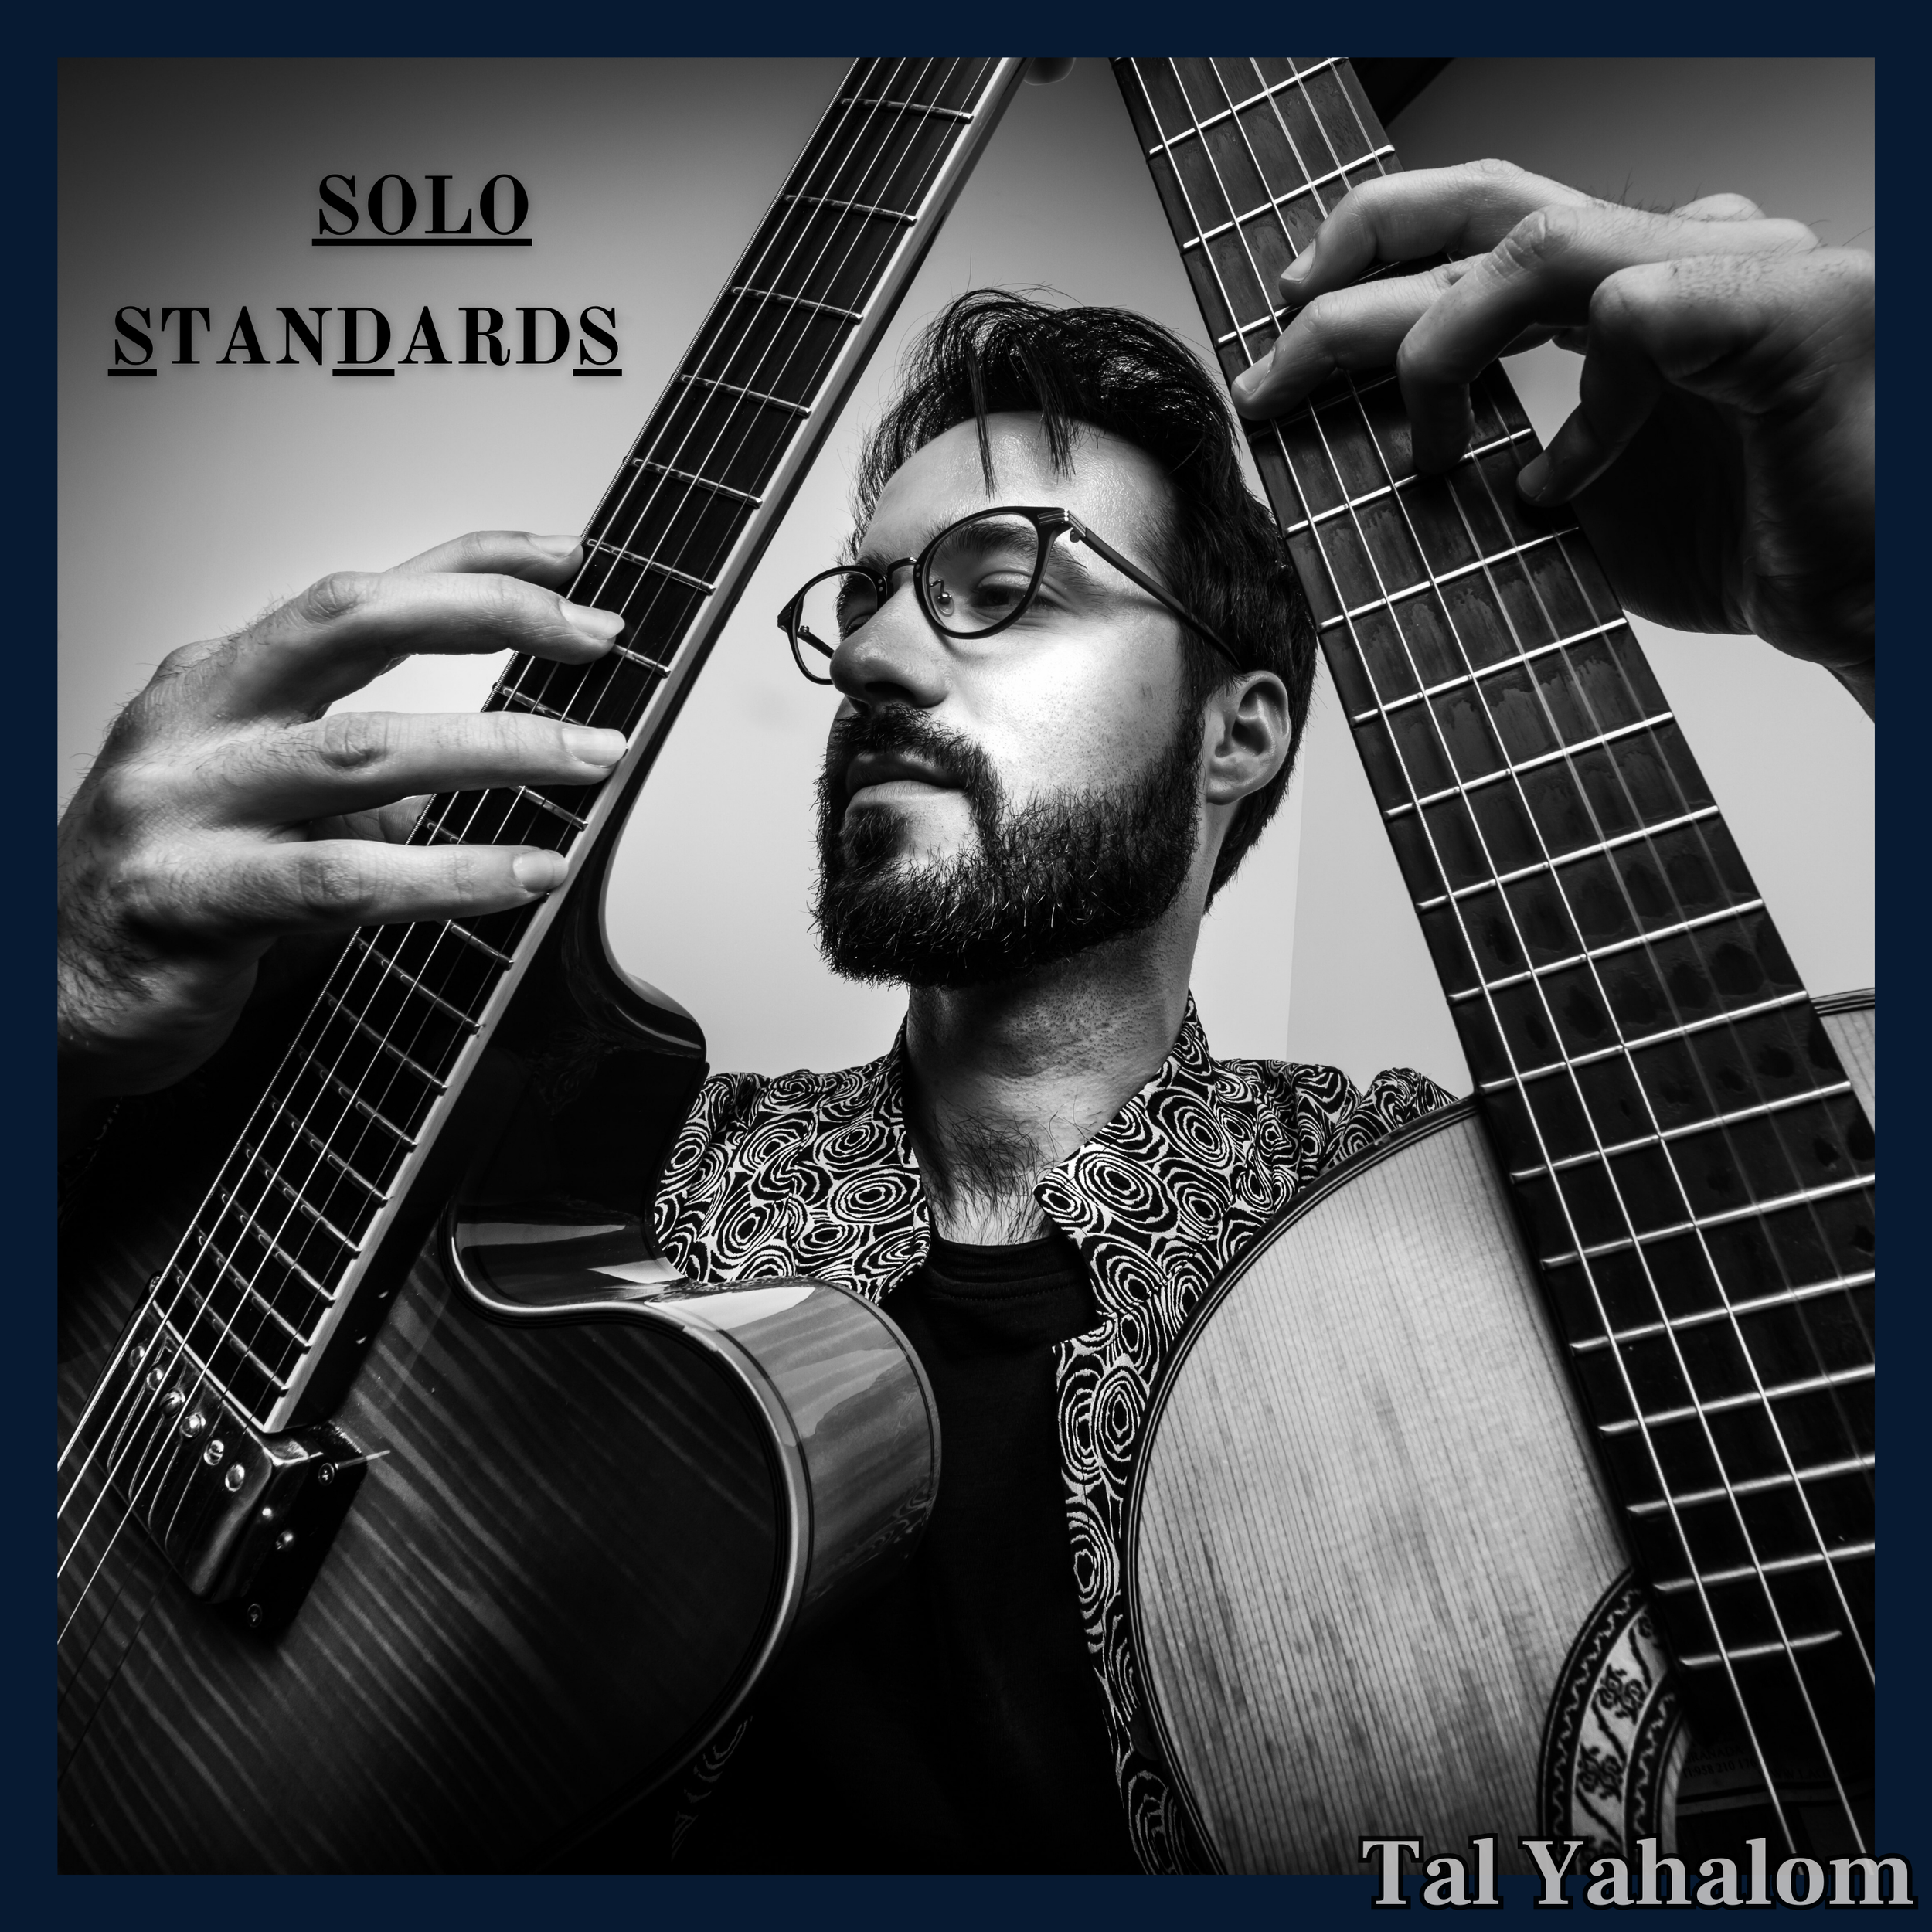 Solo Standards